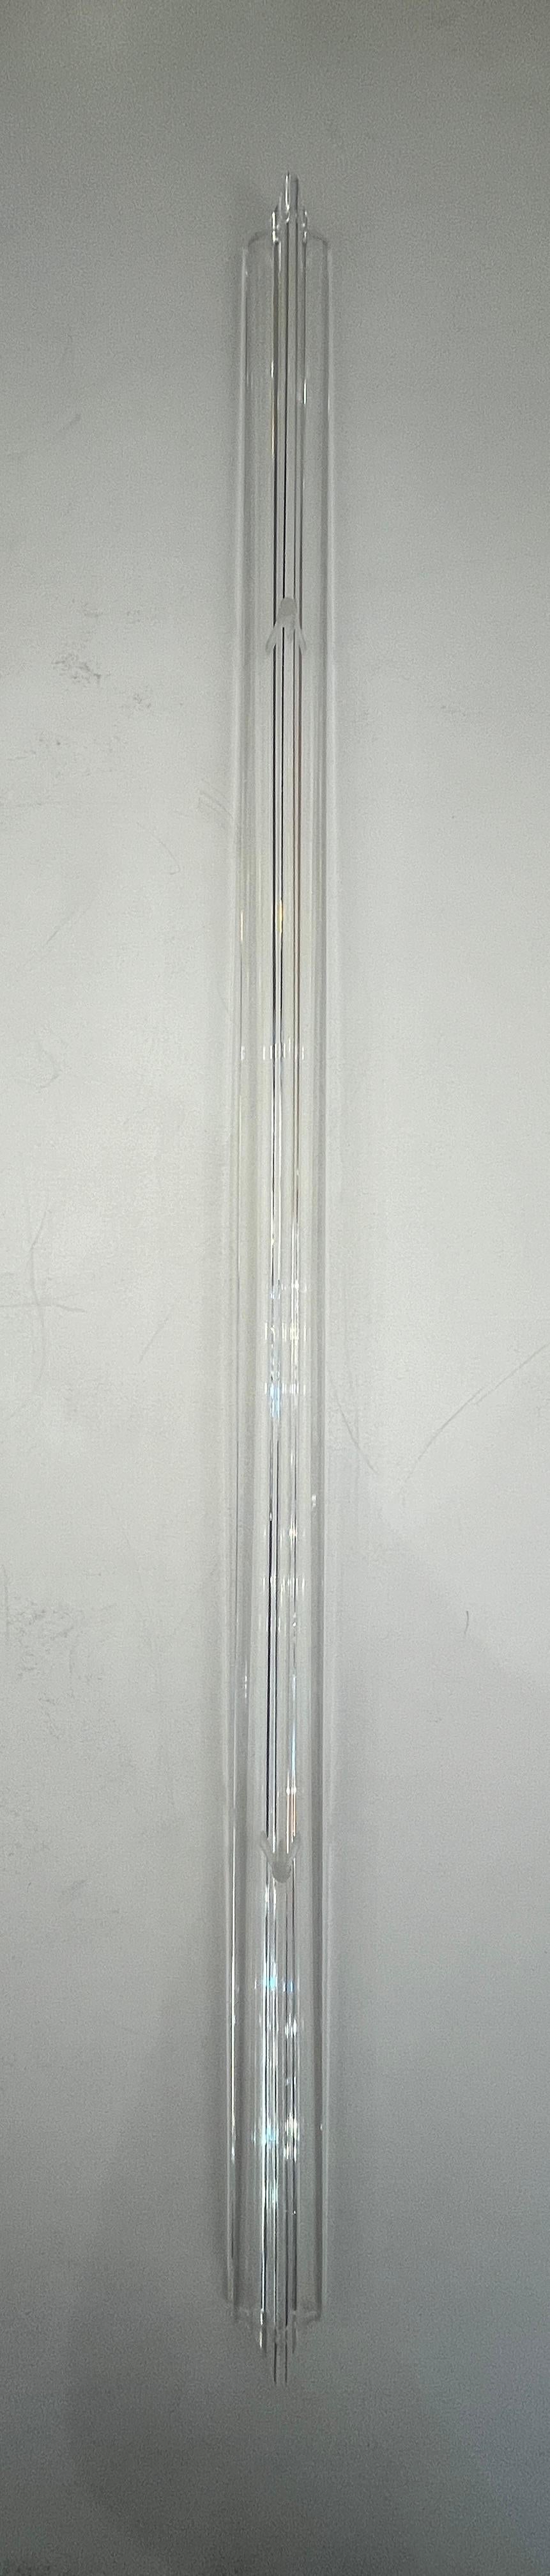 Murano Glass Rod replacement for triedri wall lights